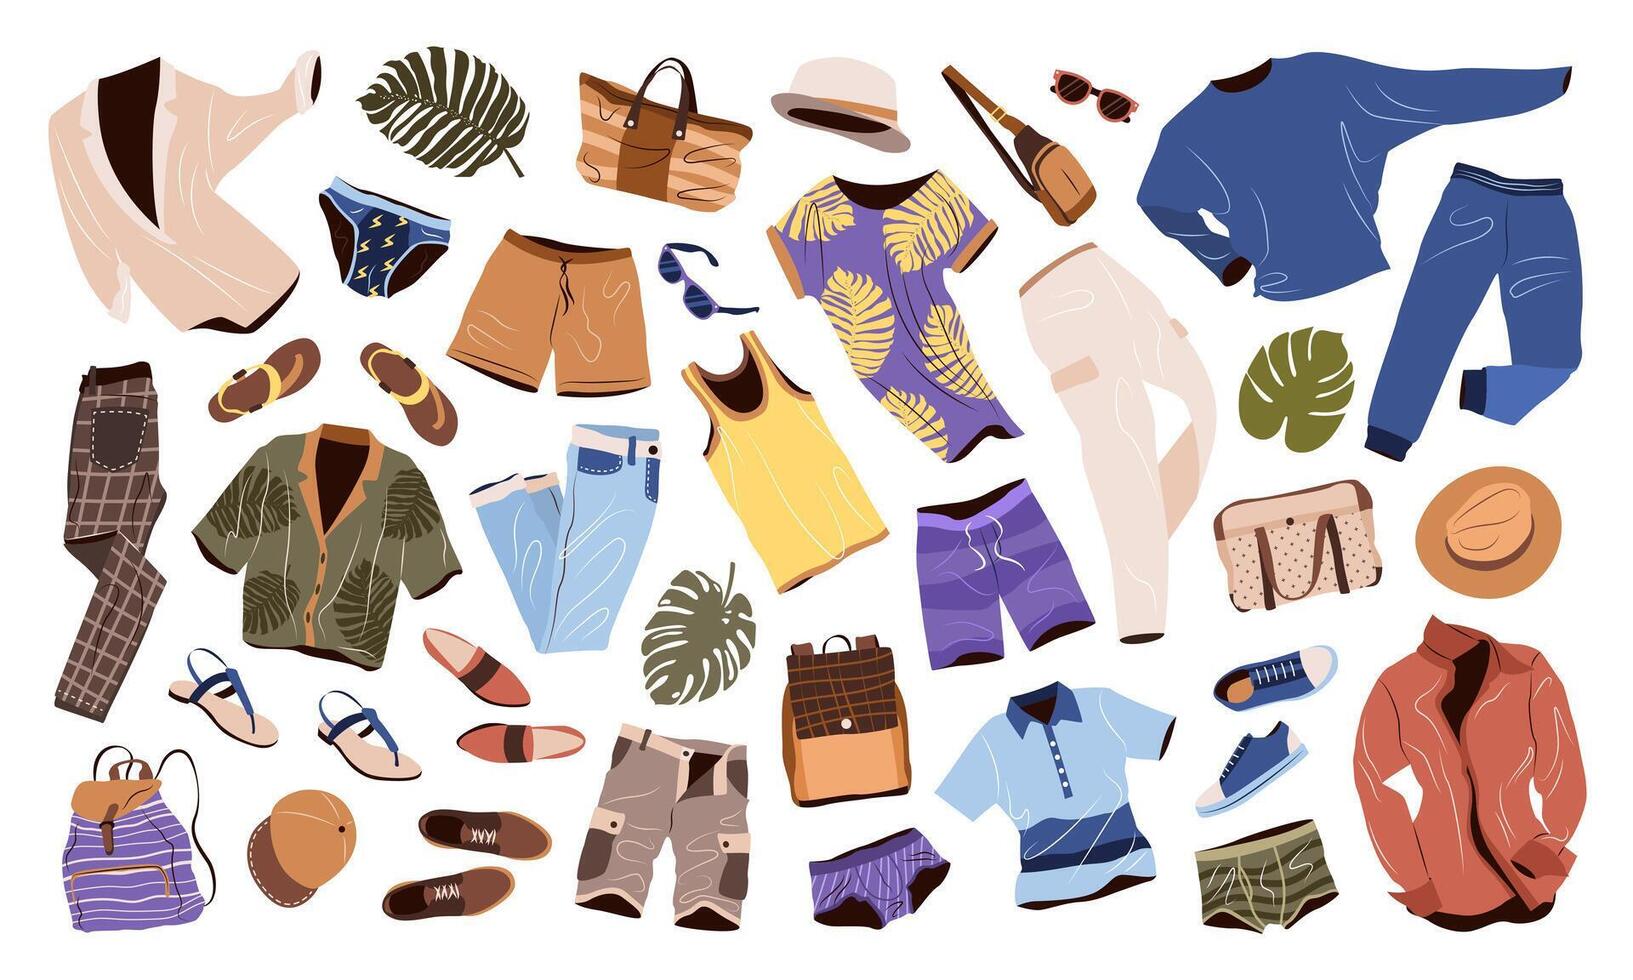 Clothes set in casual style for men. Fashion trendy clothing, accessories, shoes, hats for spring, summer and vacation. isolated flat vector illustrations on white background.